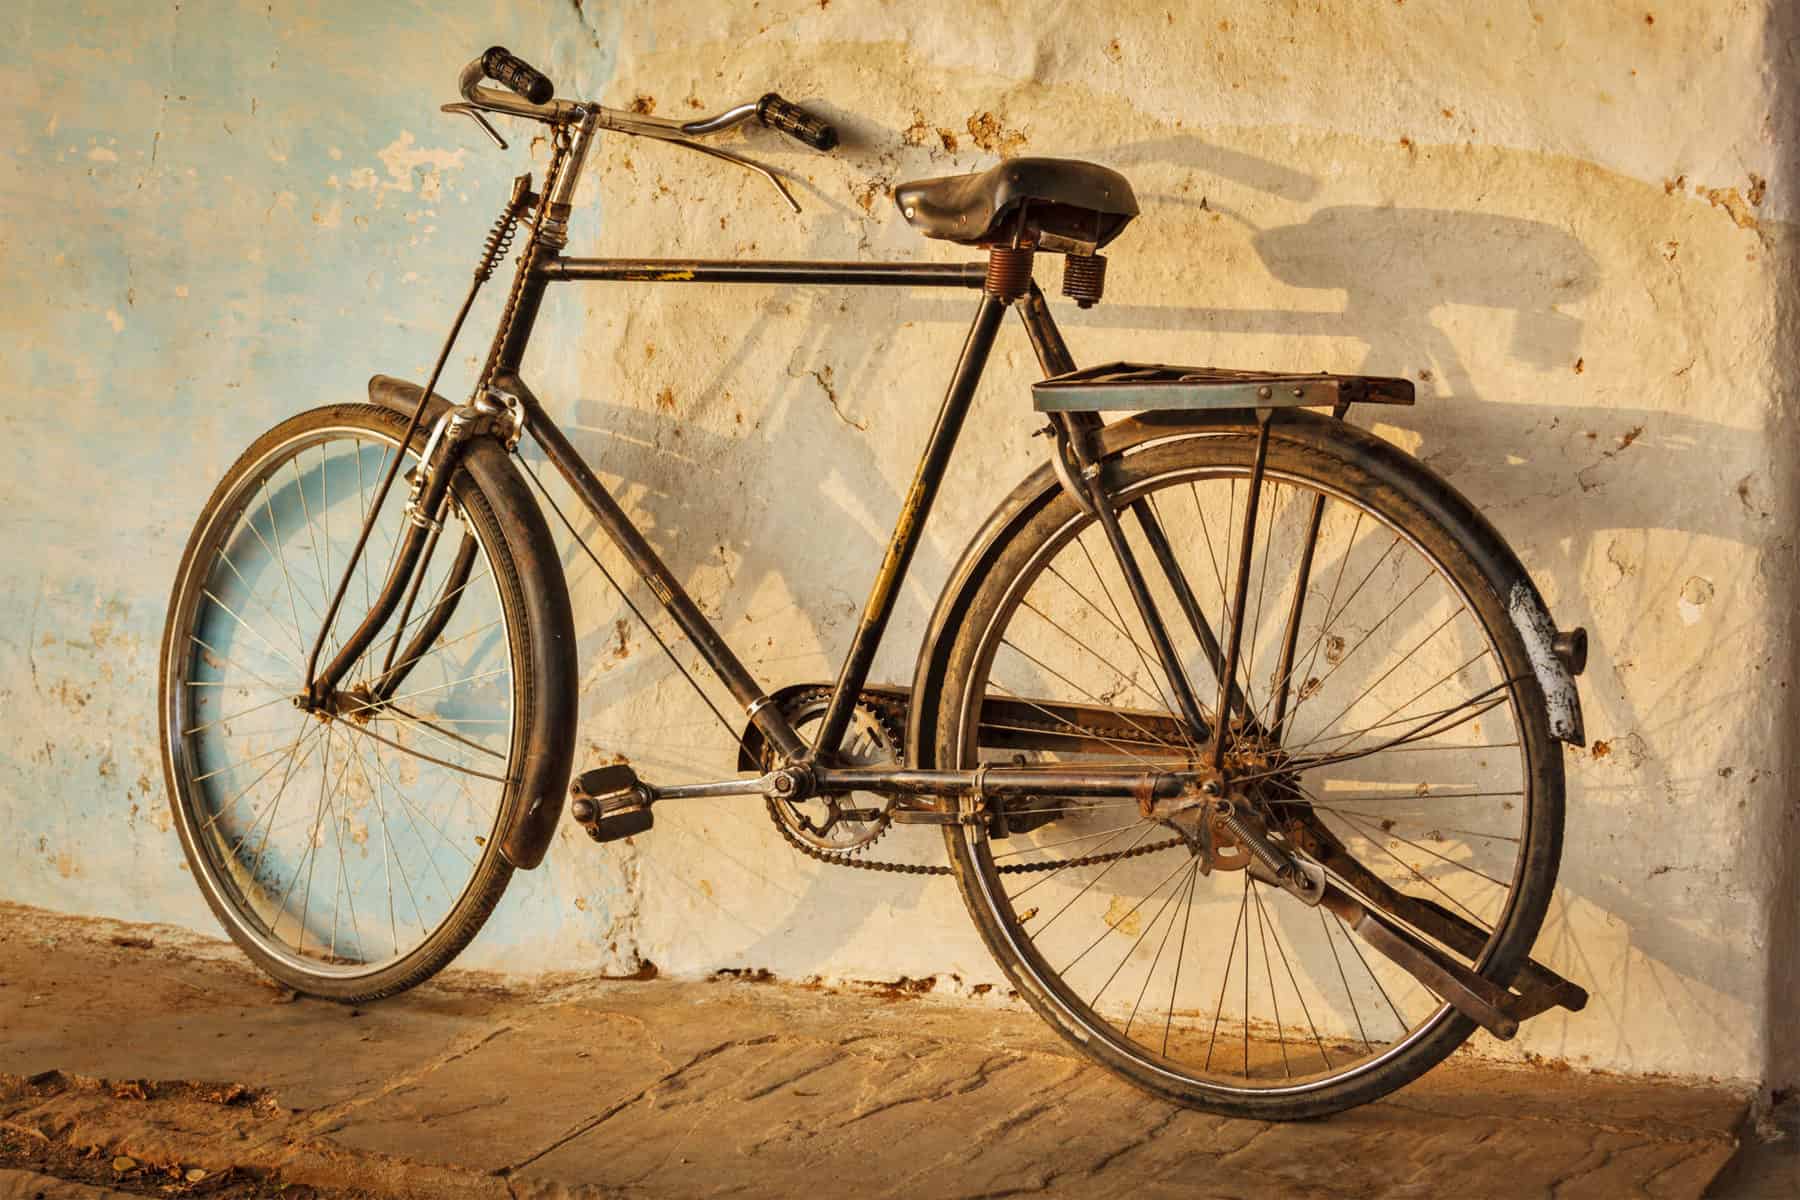 Old Indian bicycle in the street of India